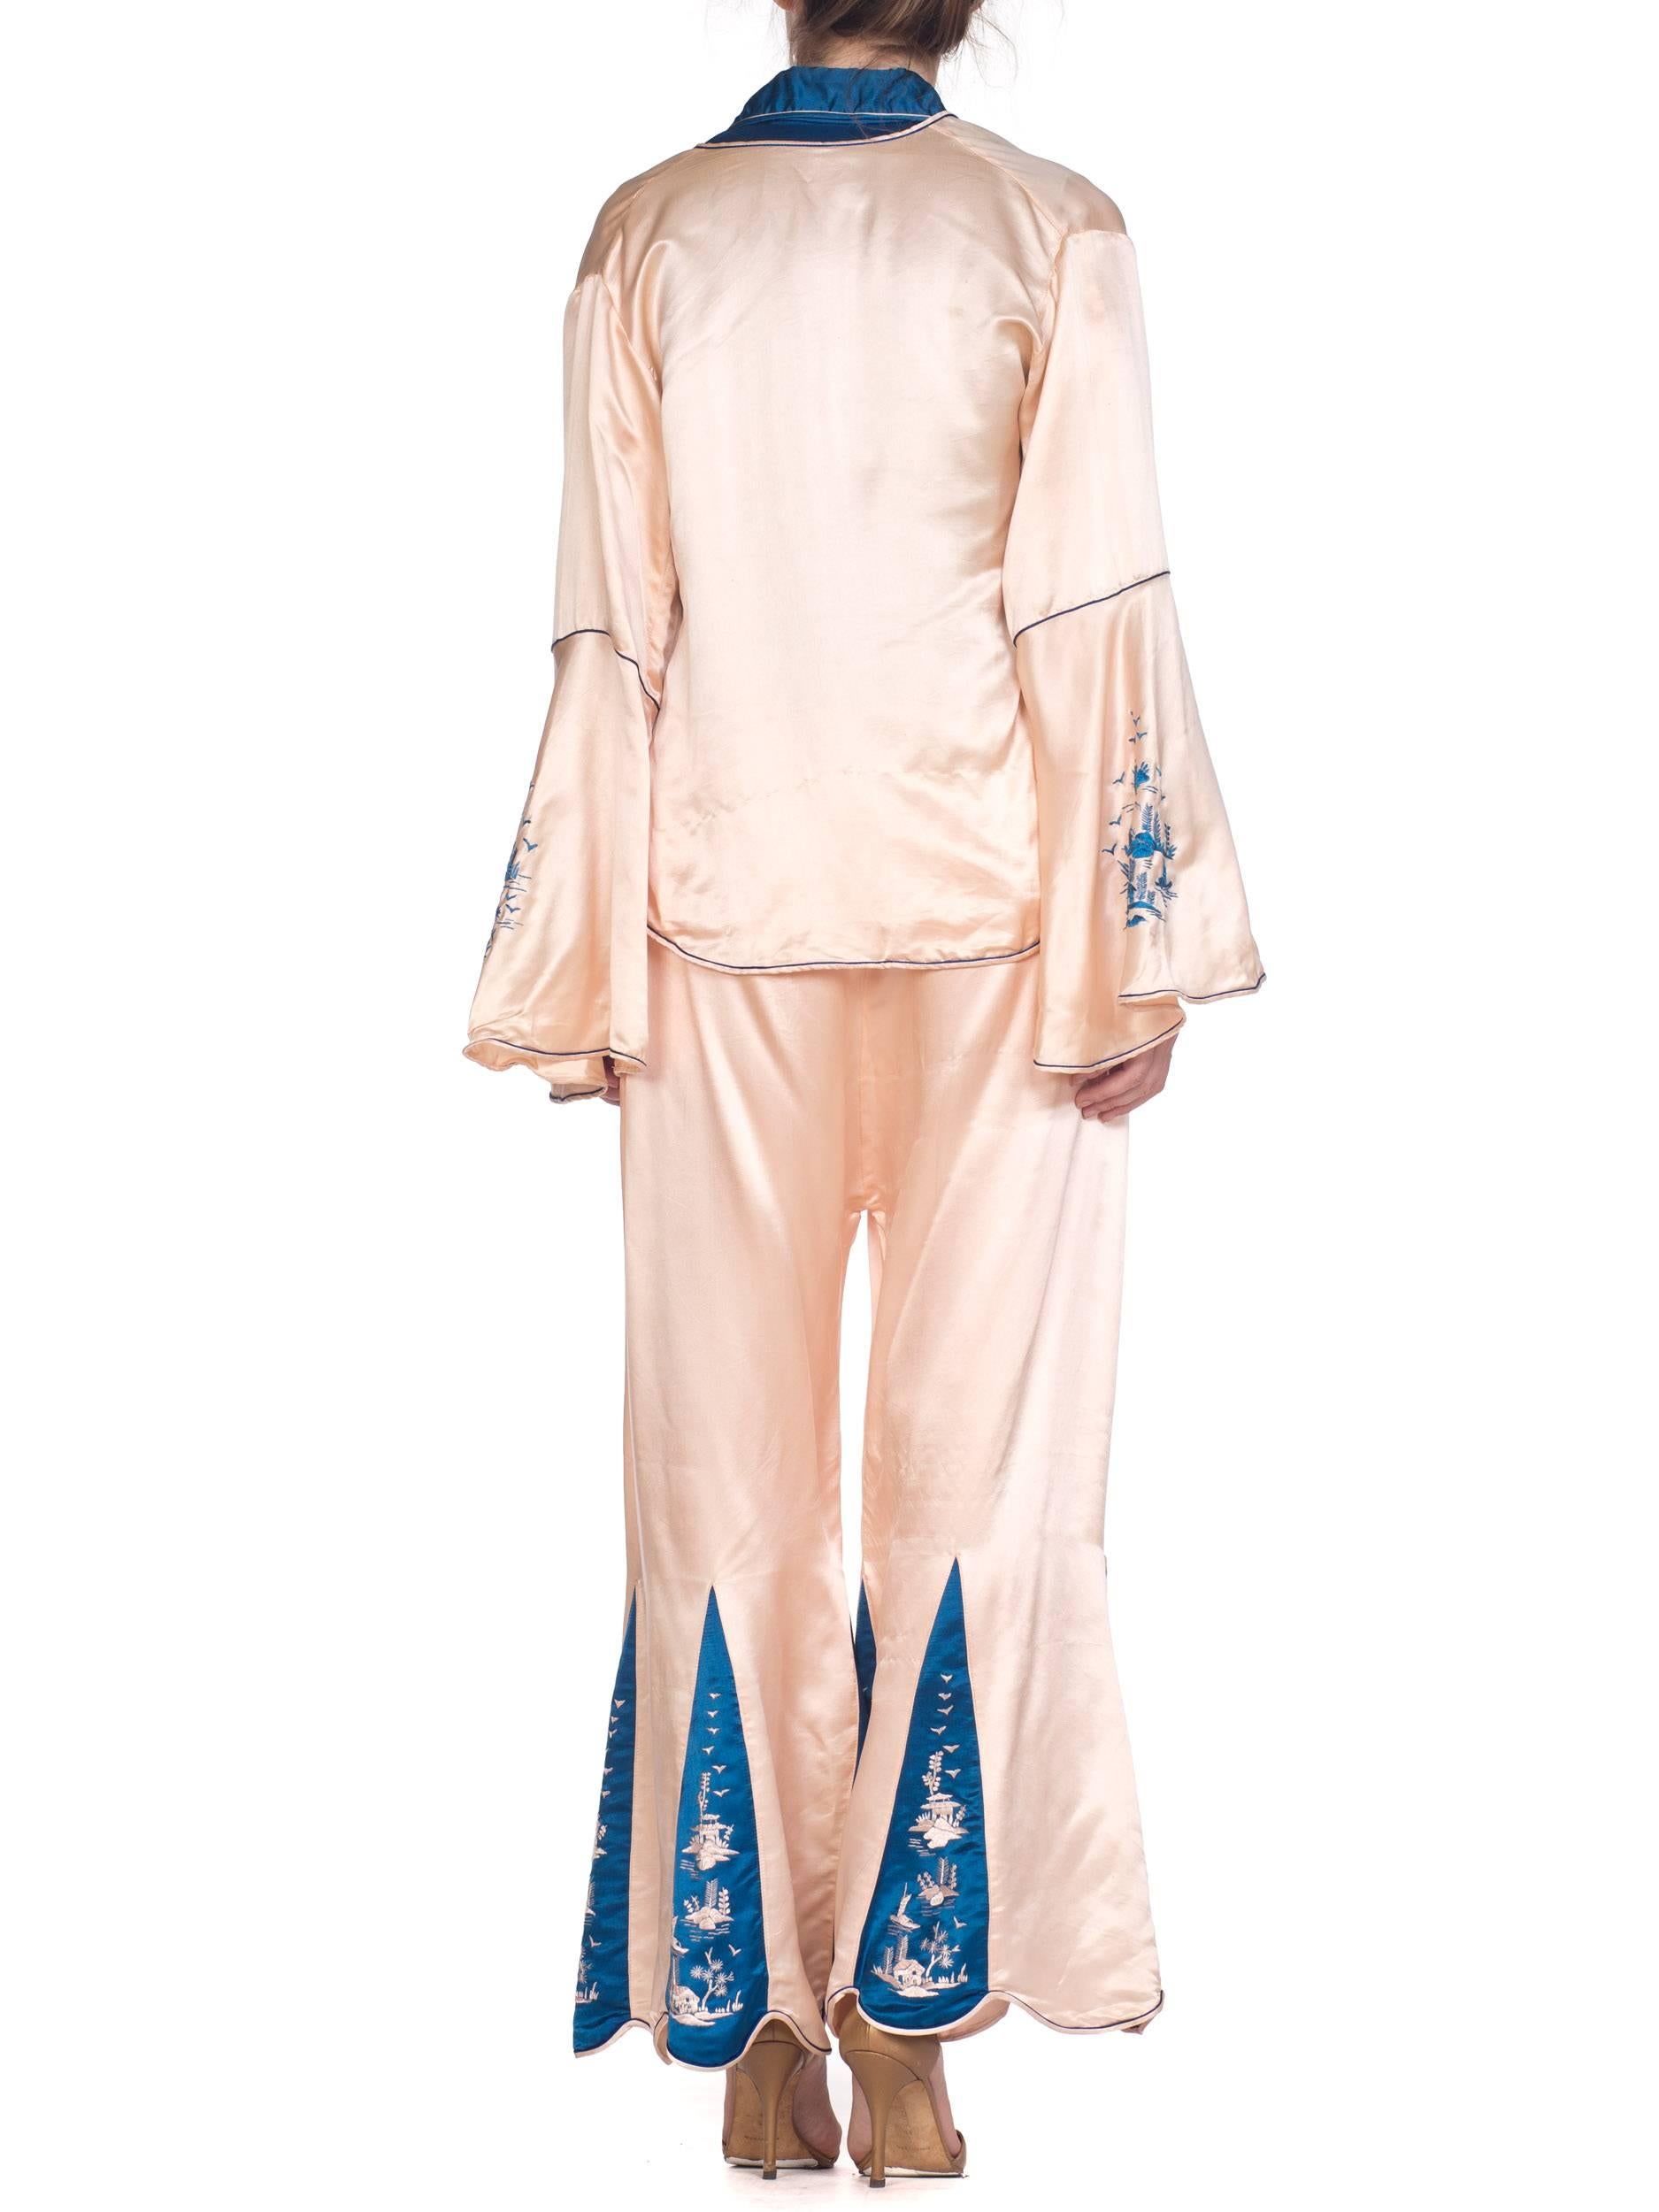 1920s 3 Piece Blue and Cream Chinese Beach Pajamas With Hand Embroidery 3